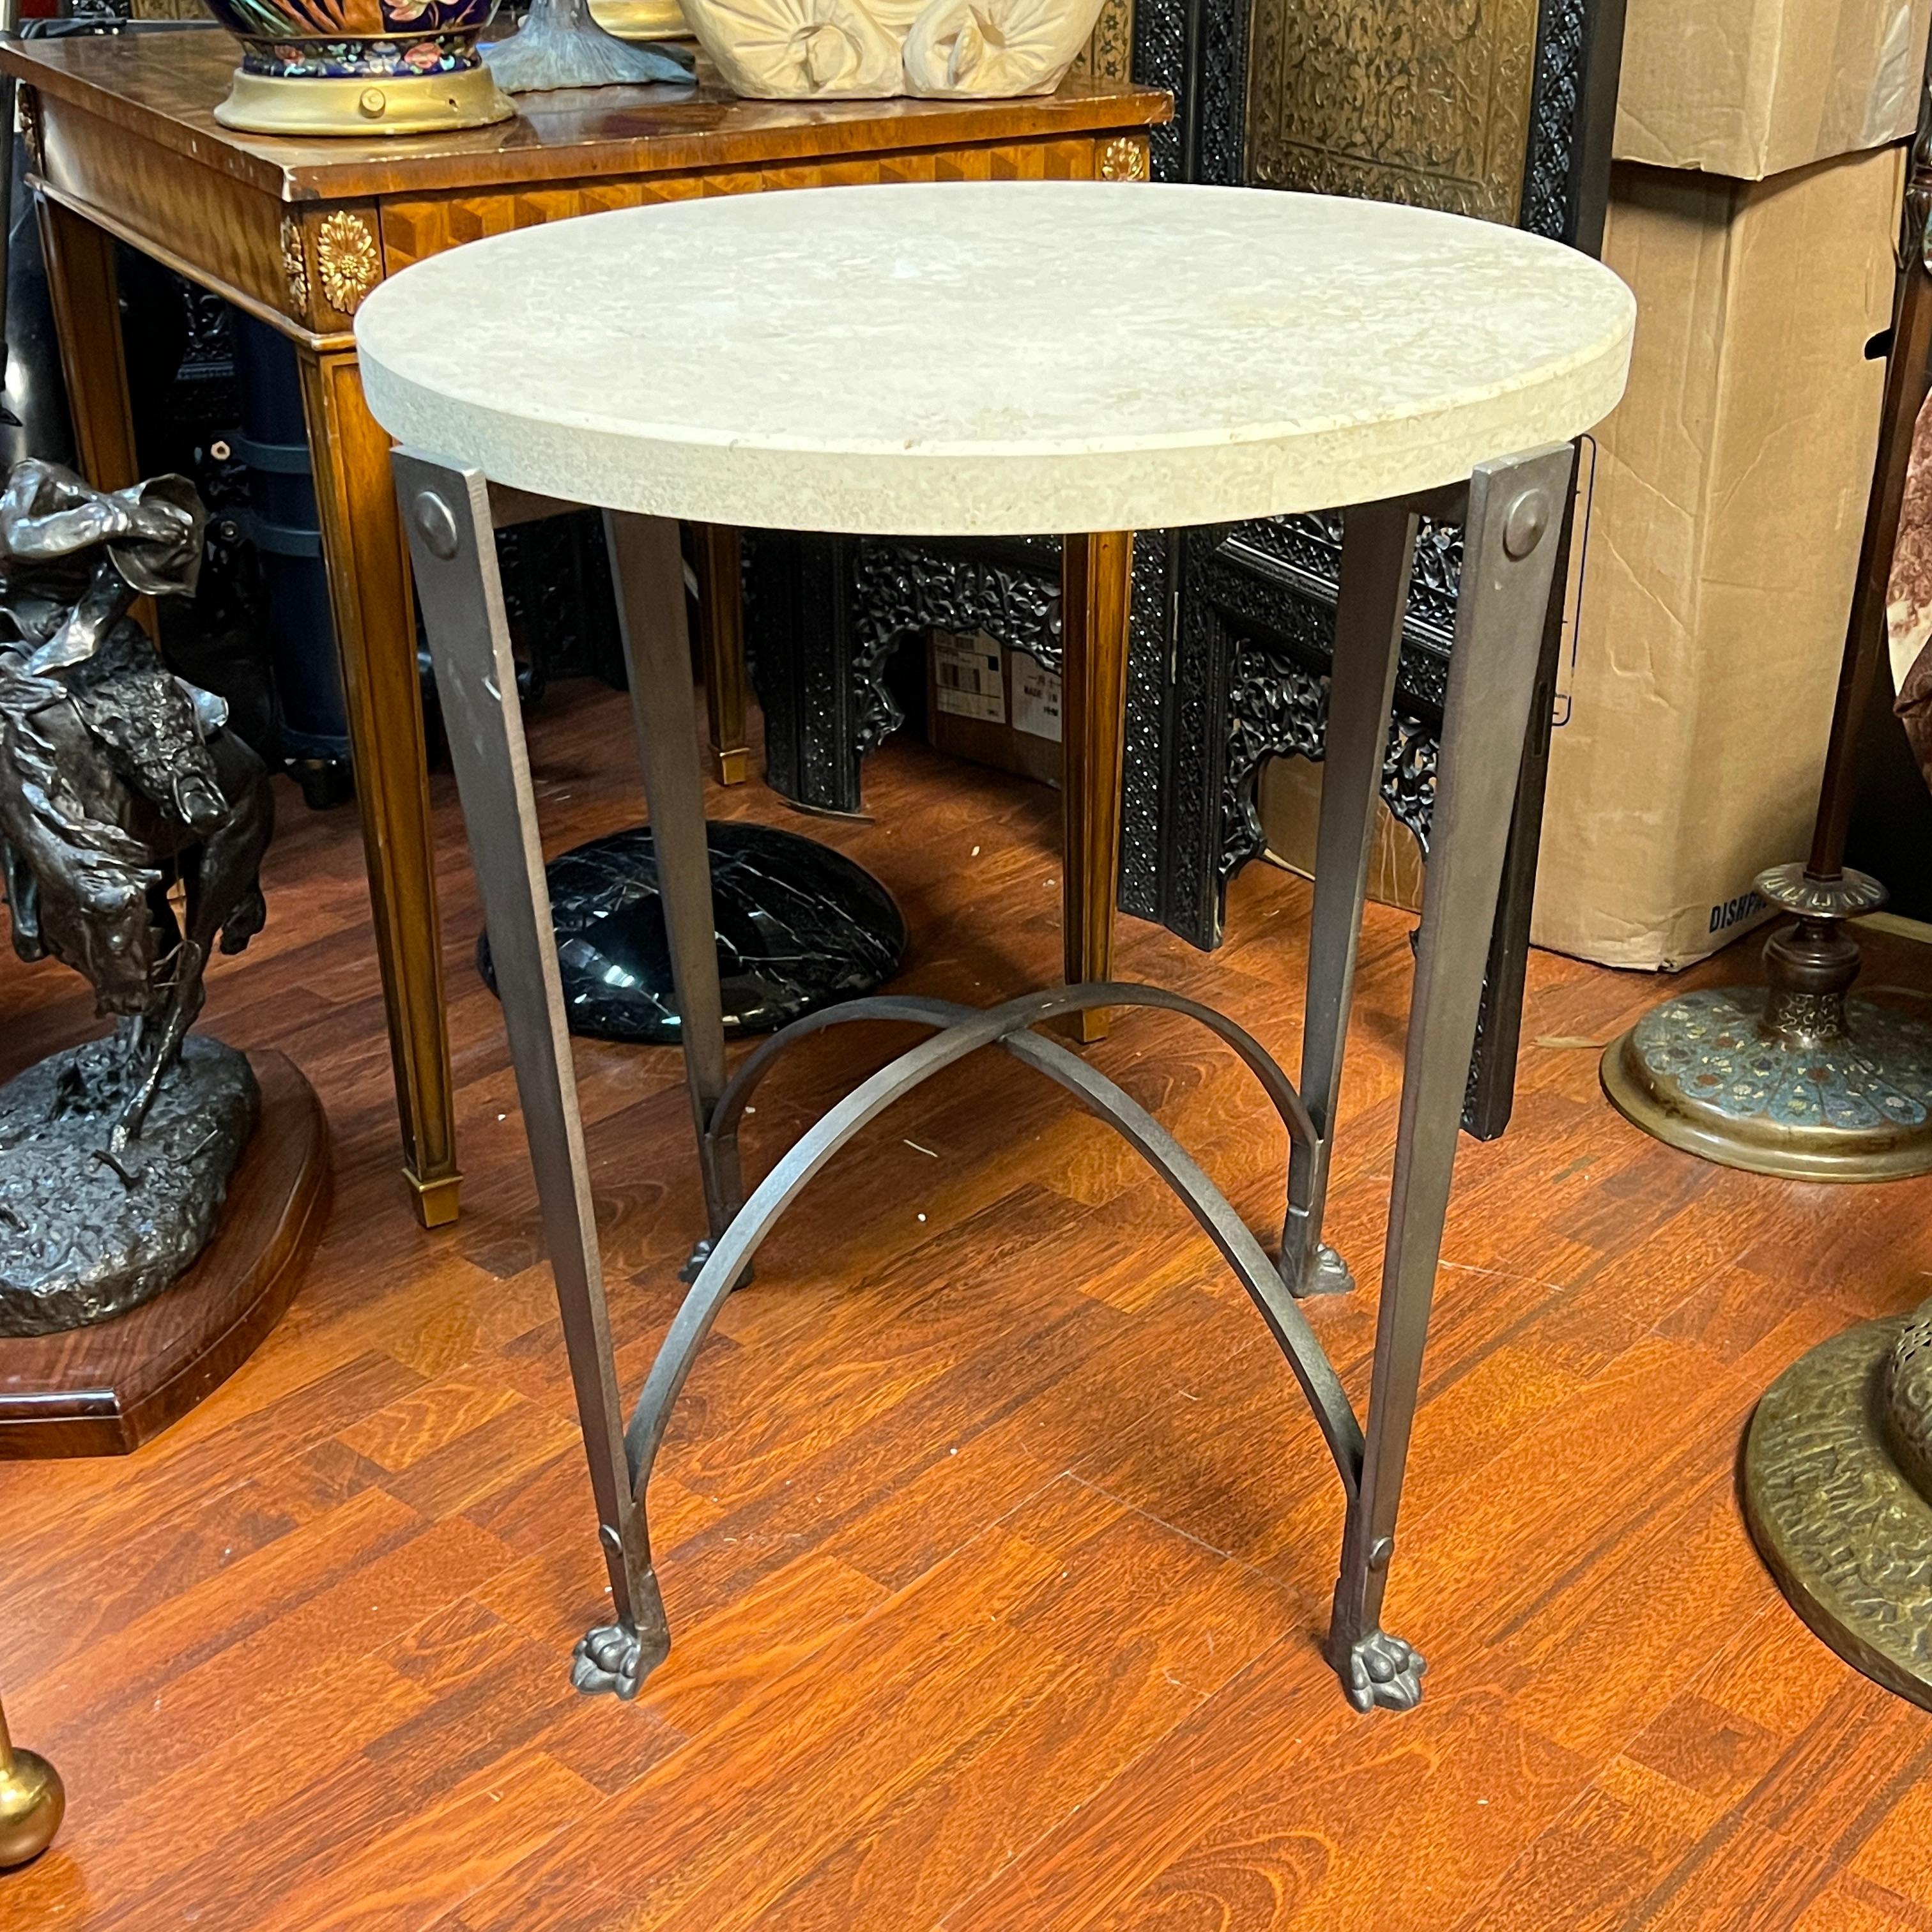 Vintage Circular Iron Side Table with Travertine Stone Top For Sale 2